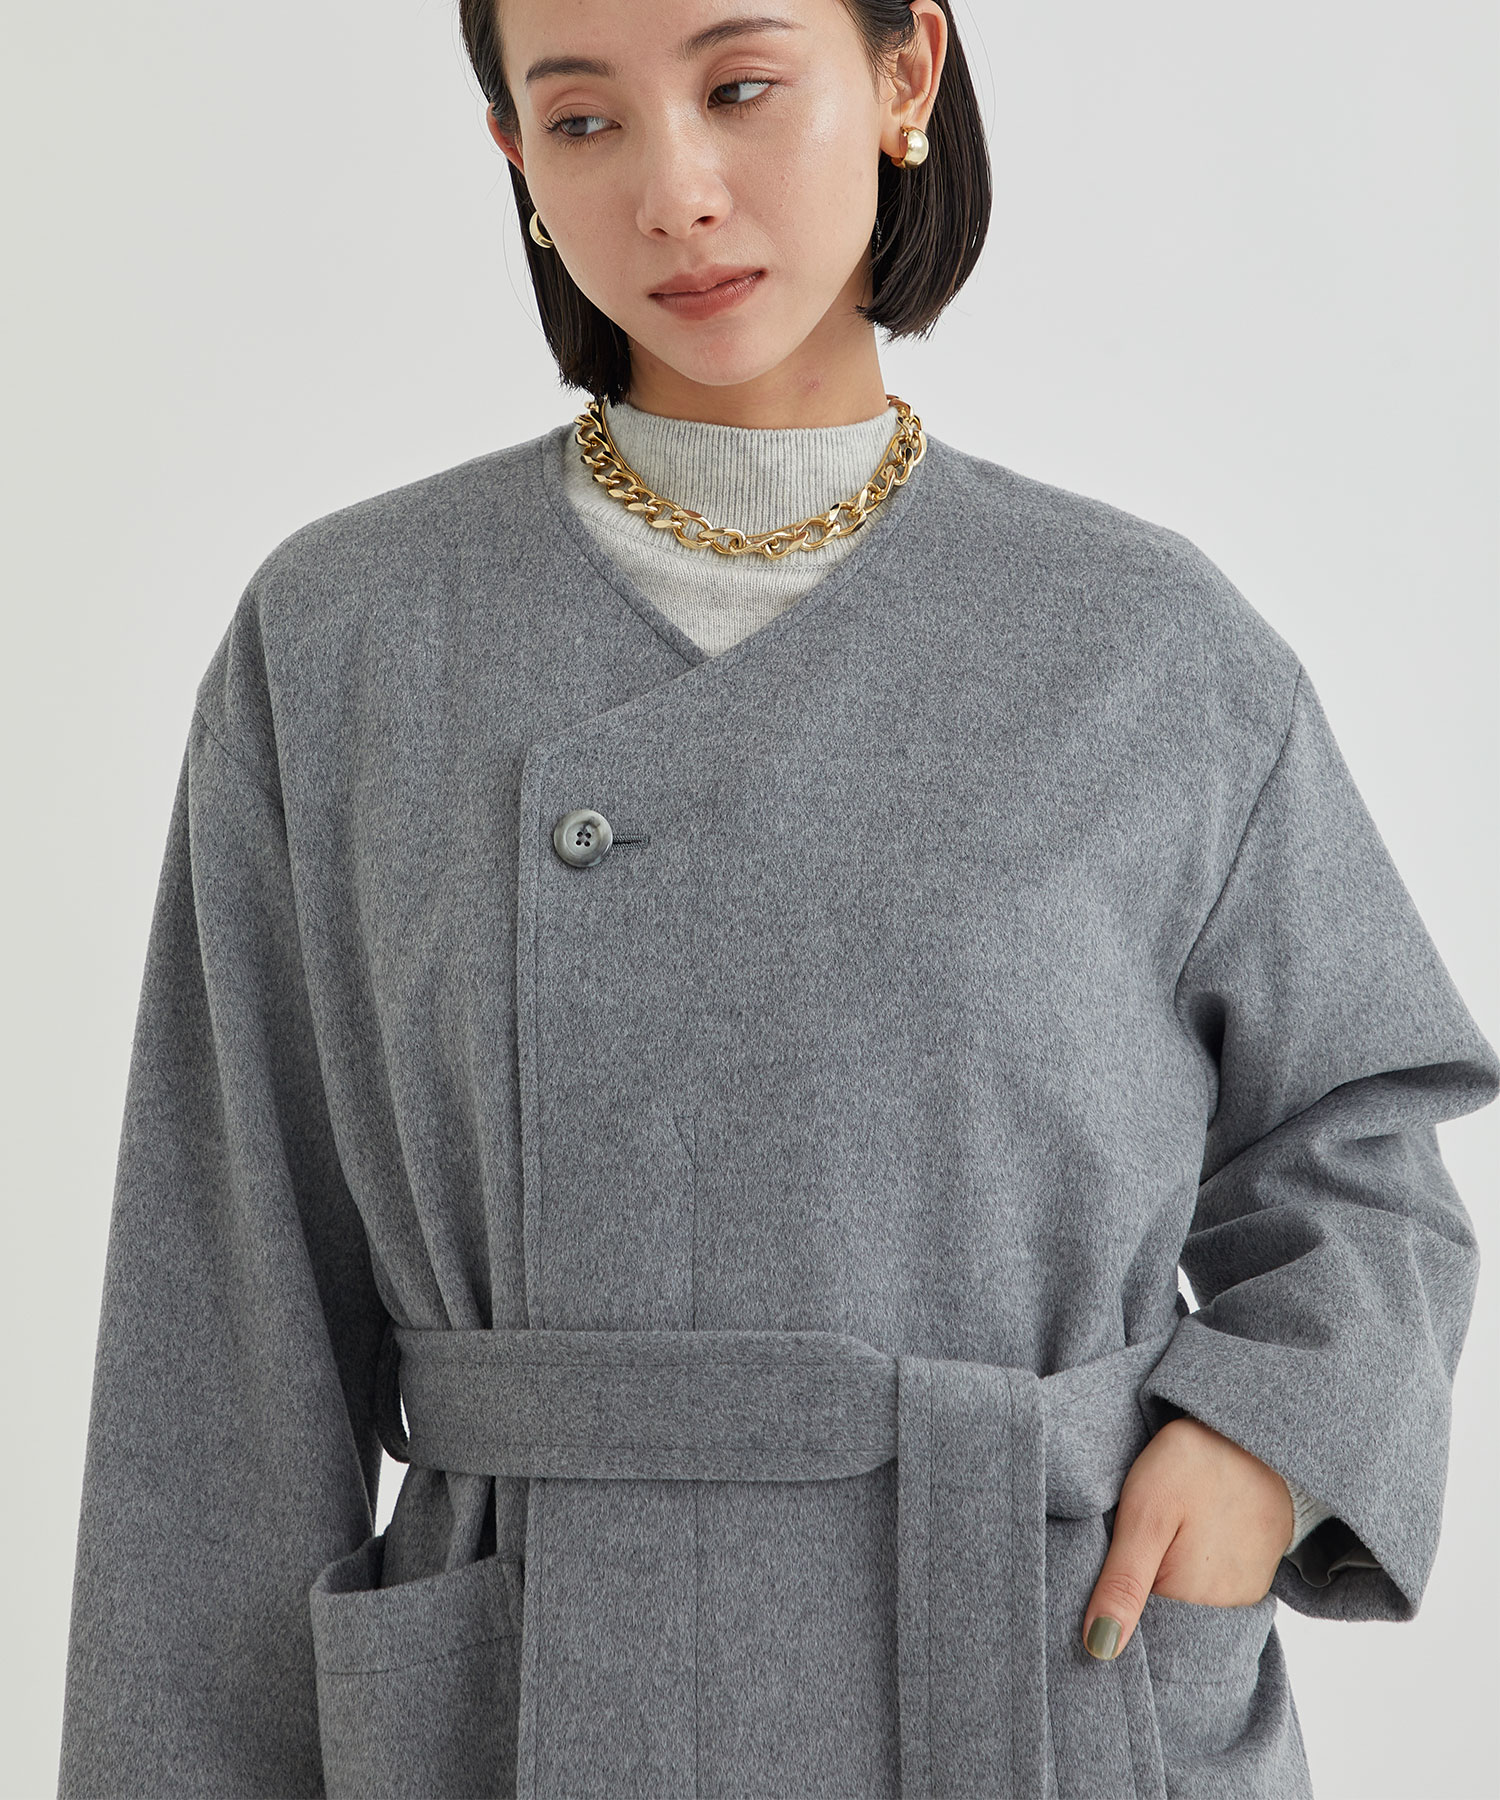 belted no collar wool coat THE PERMANENT EYE